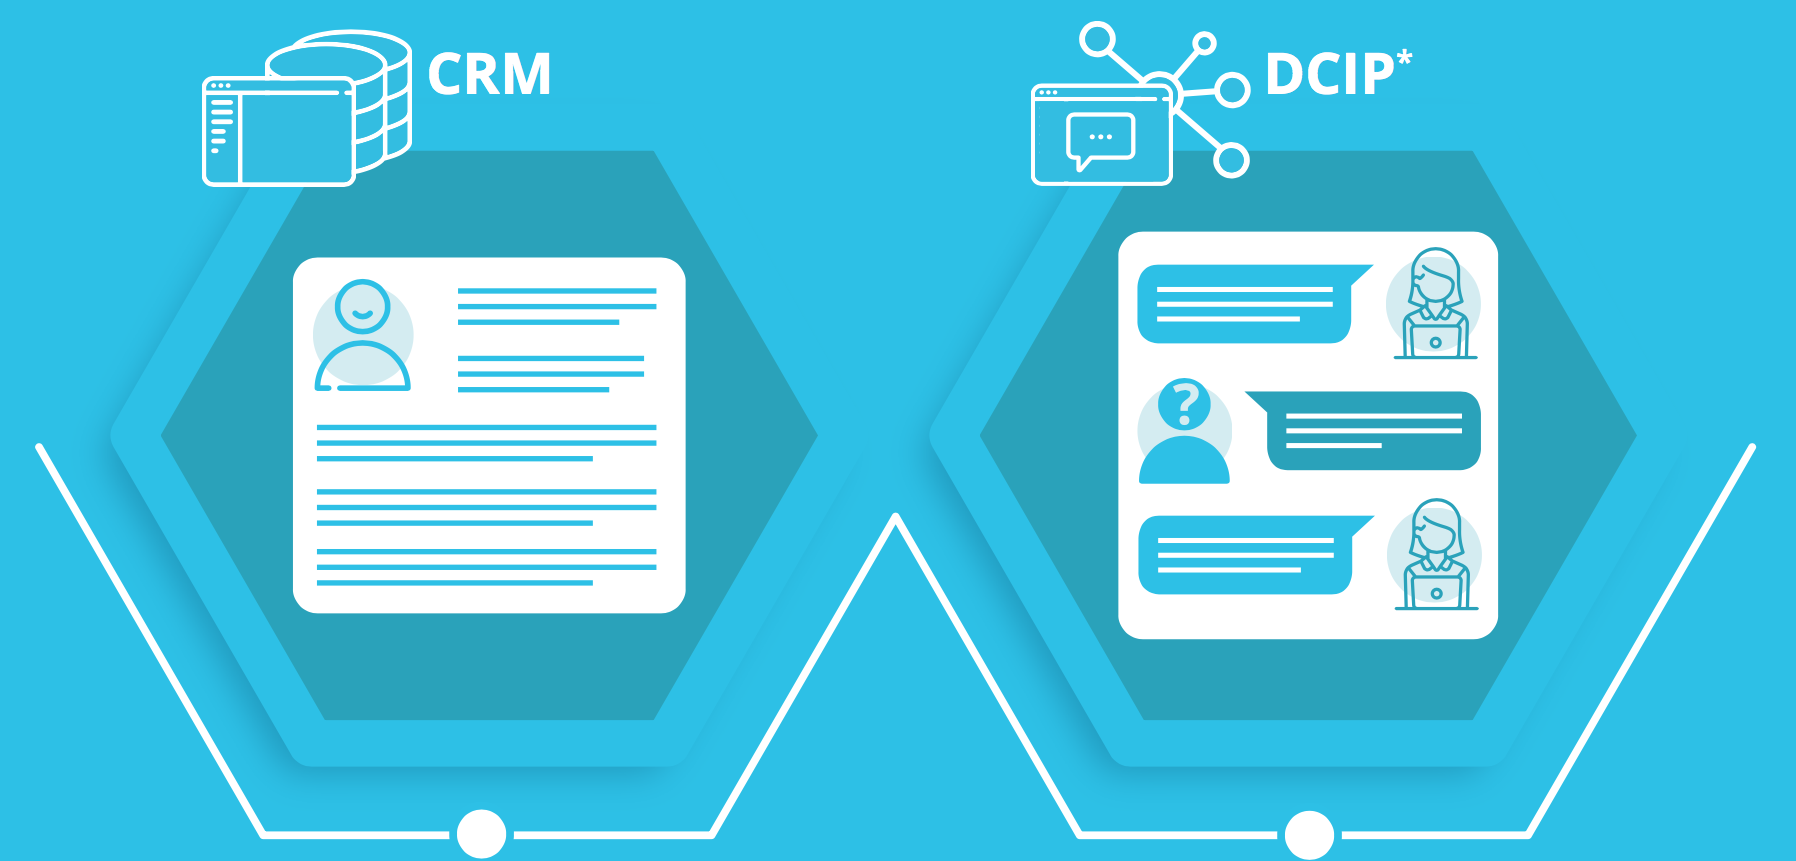 CRM DCIP infographic